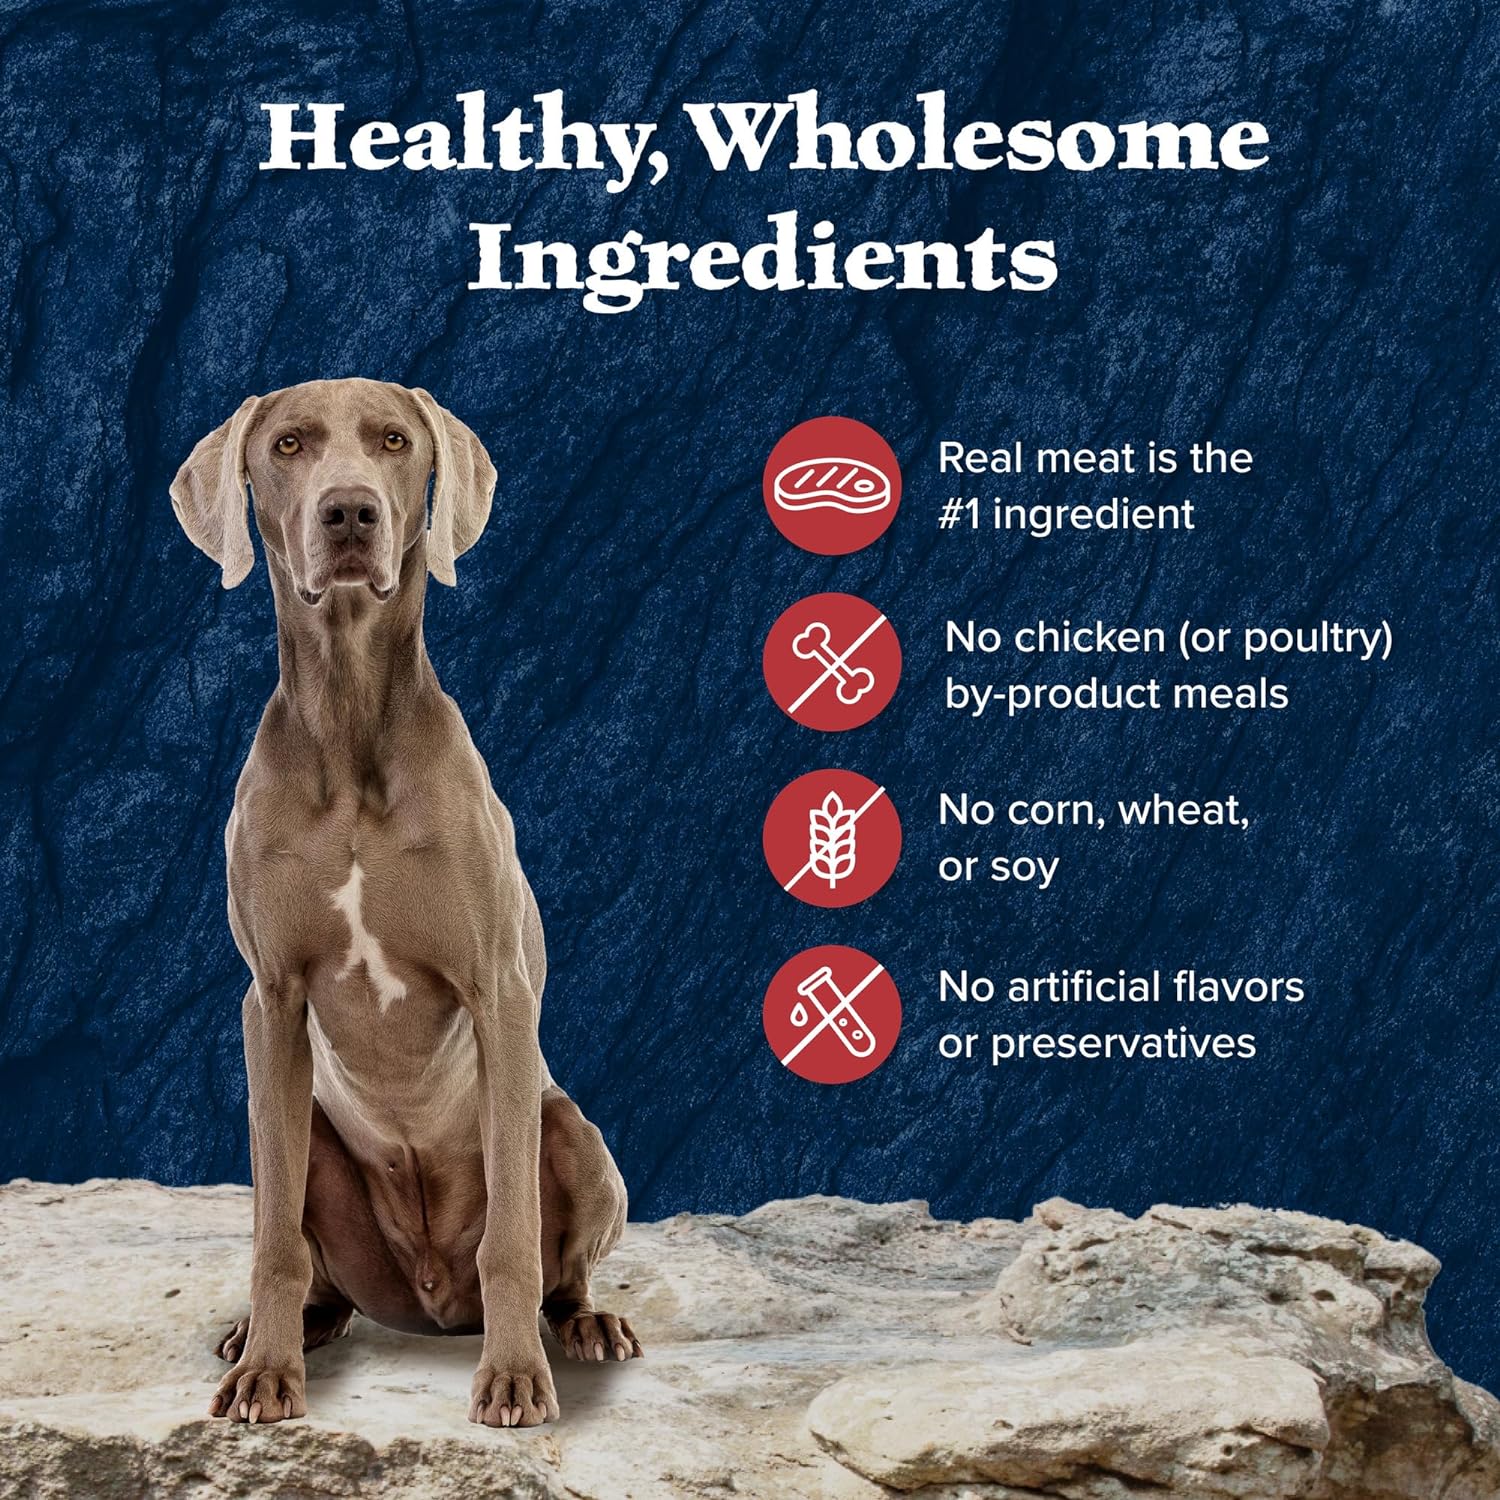 Blue Buffalo Wilderness Rocky Mountain Recipe Senior Wet Dog Food, High-Protein & Grain-Free, Made with Natural Ingredients, Red Meat Recipe, 12.5-oz. Cans (12 Count)